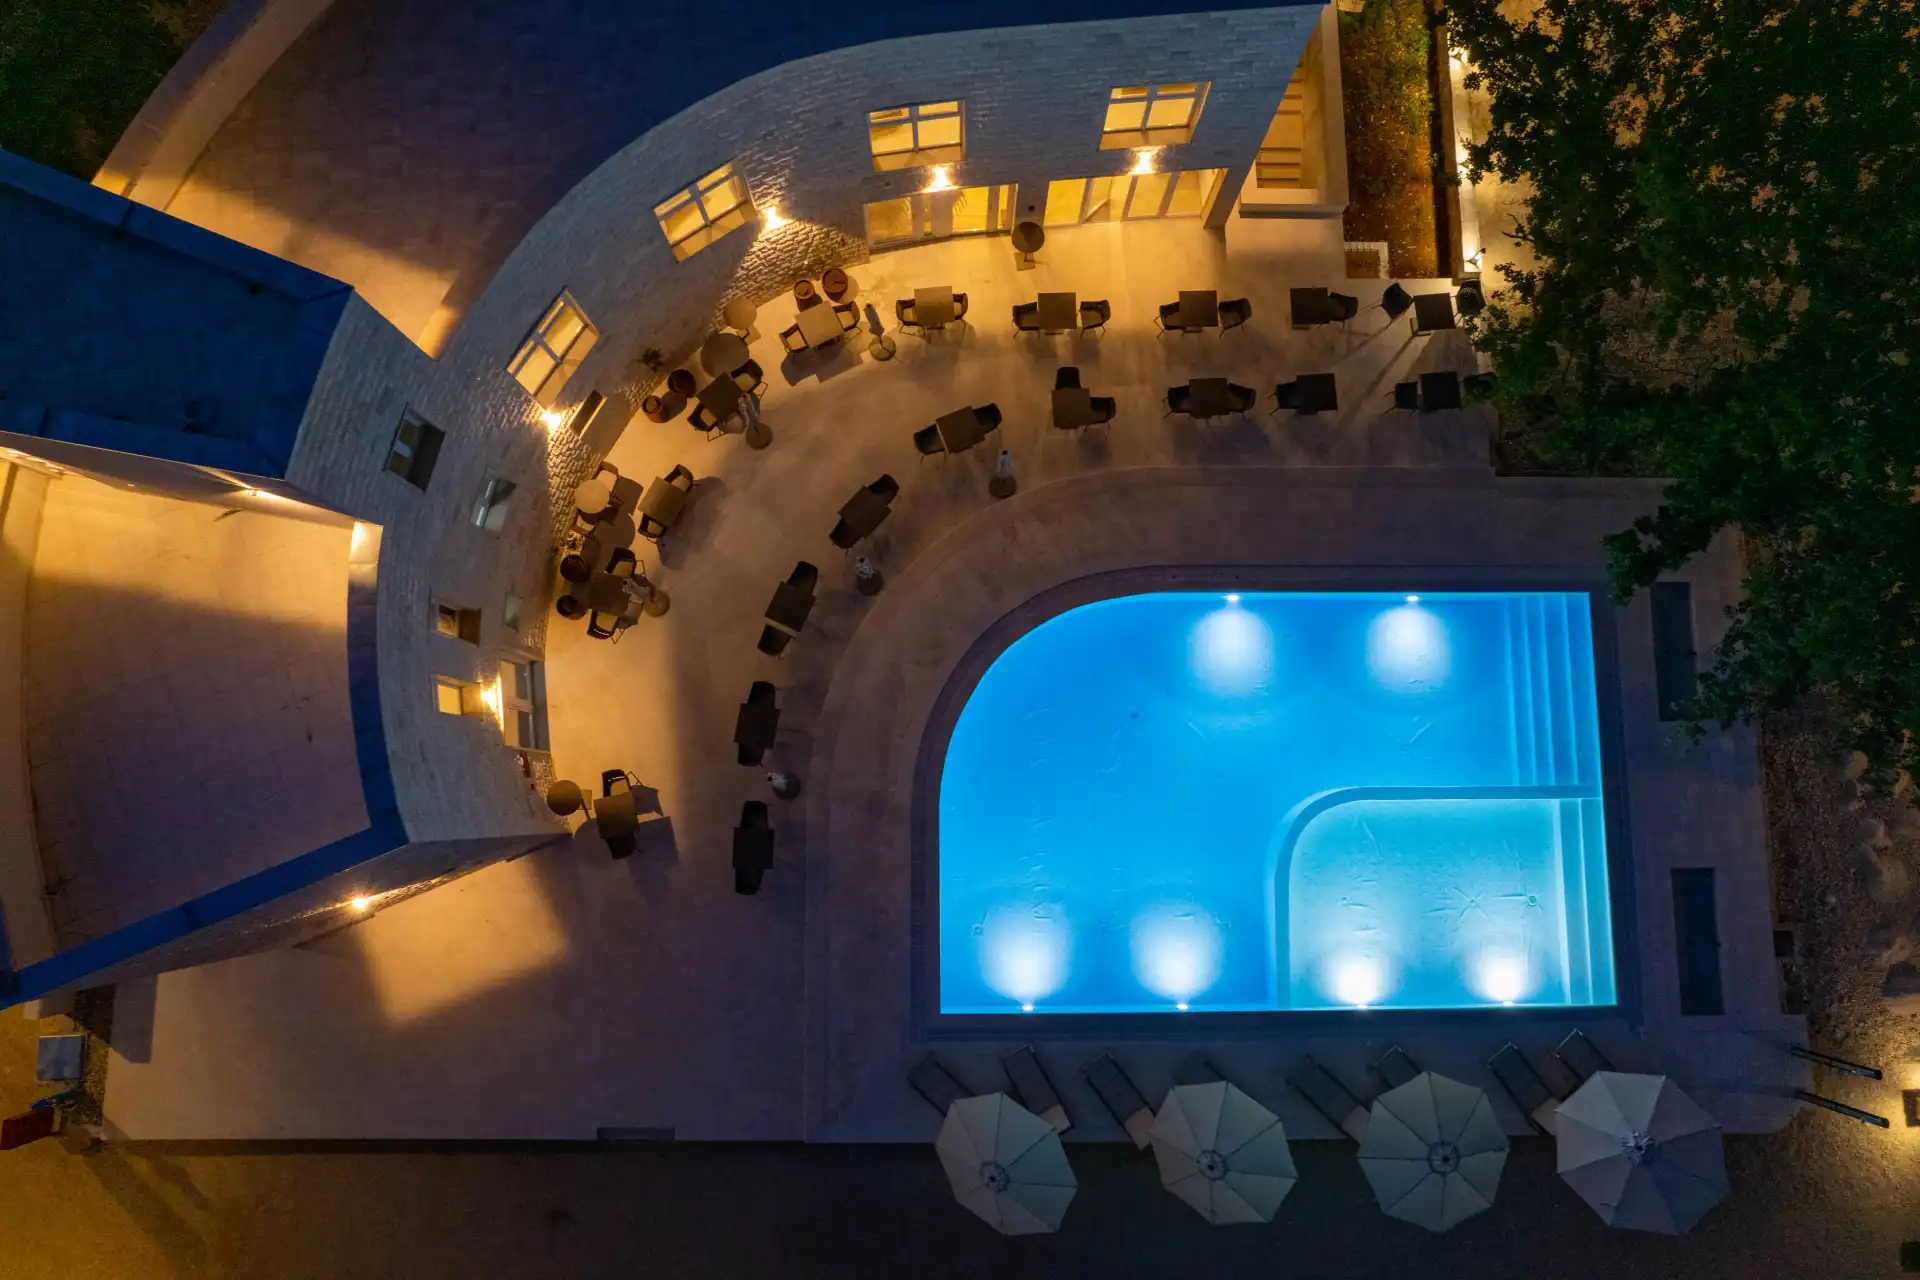 Aerial view of a swimming pool at night surrounded by chairs and umbrellas. The swimming pool is blue and there are chairs and umbrellas on the pool deck. There are lights on in the swimming pool and the surrounding area, making it a bright and inviting space